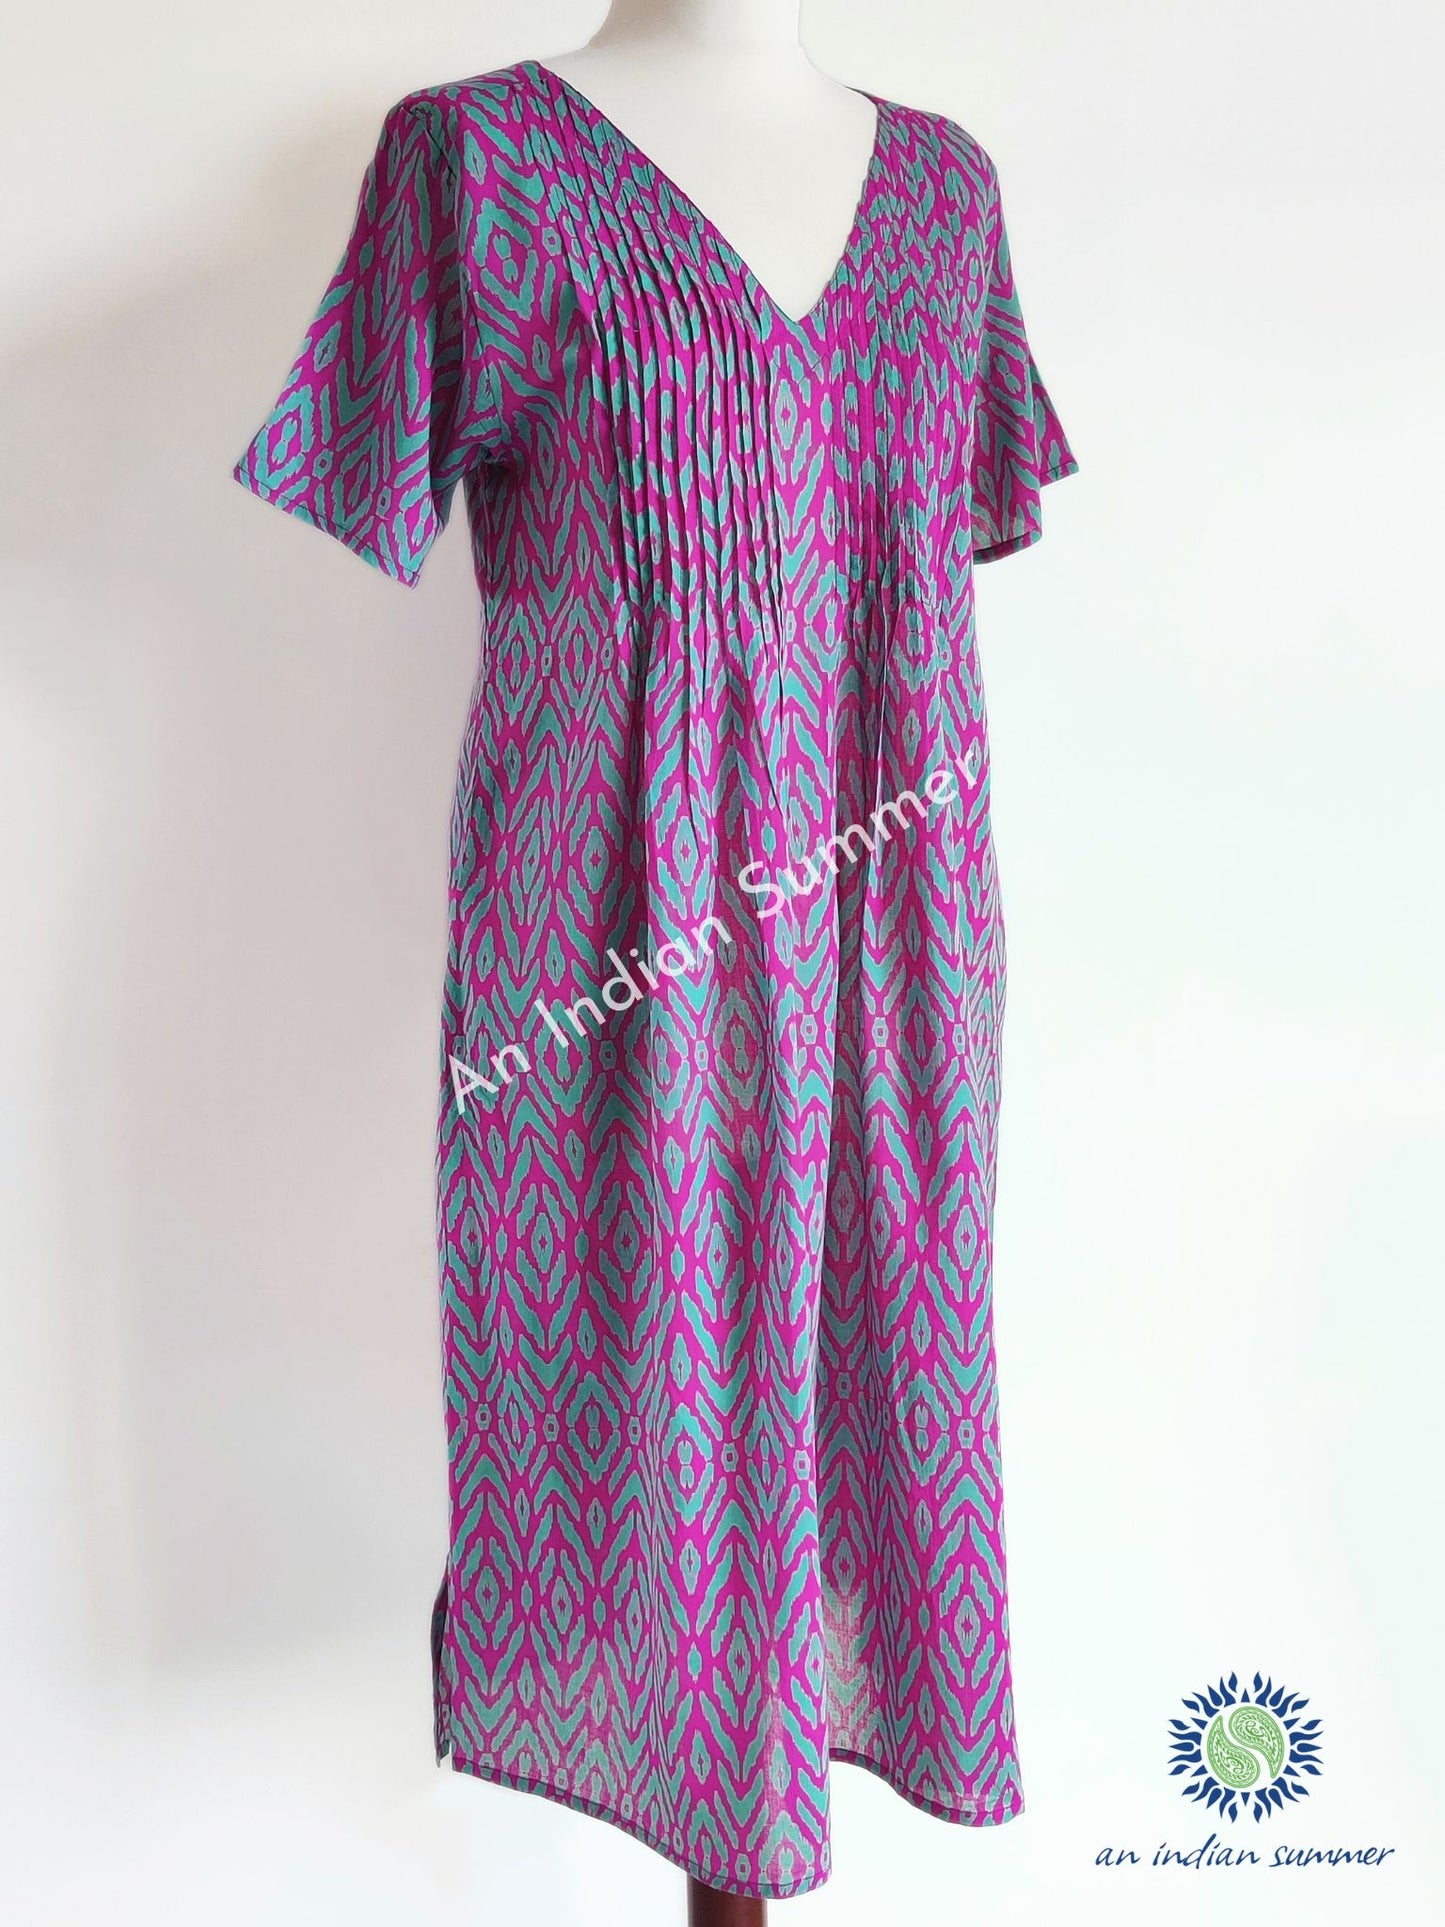 Ikat Magenta | Chloe Summer Dress | Cotton Voile | An Indian Summer | Seasonless Timeless Sustainable Ethical Authentic Artisan Conscious Clothing Lifestyle